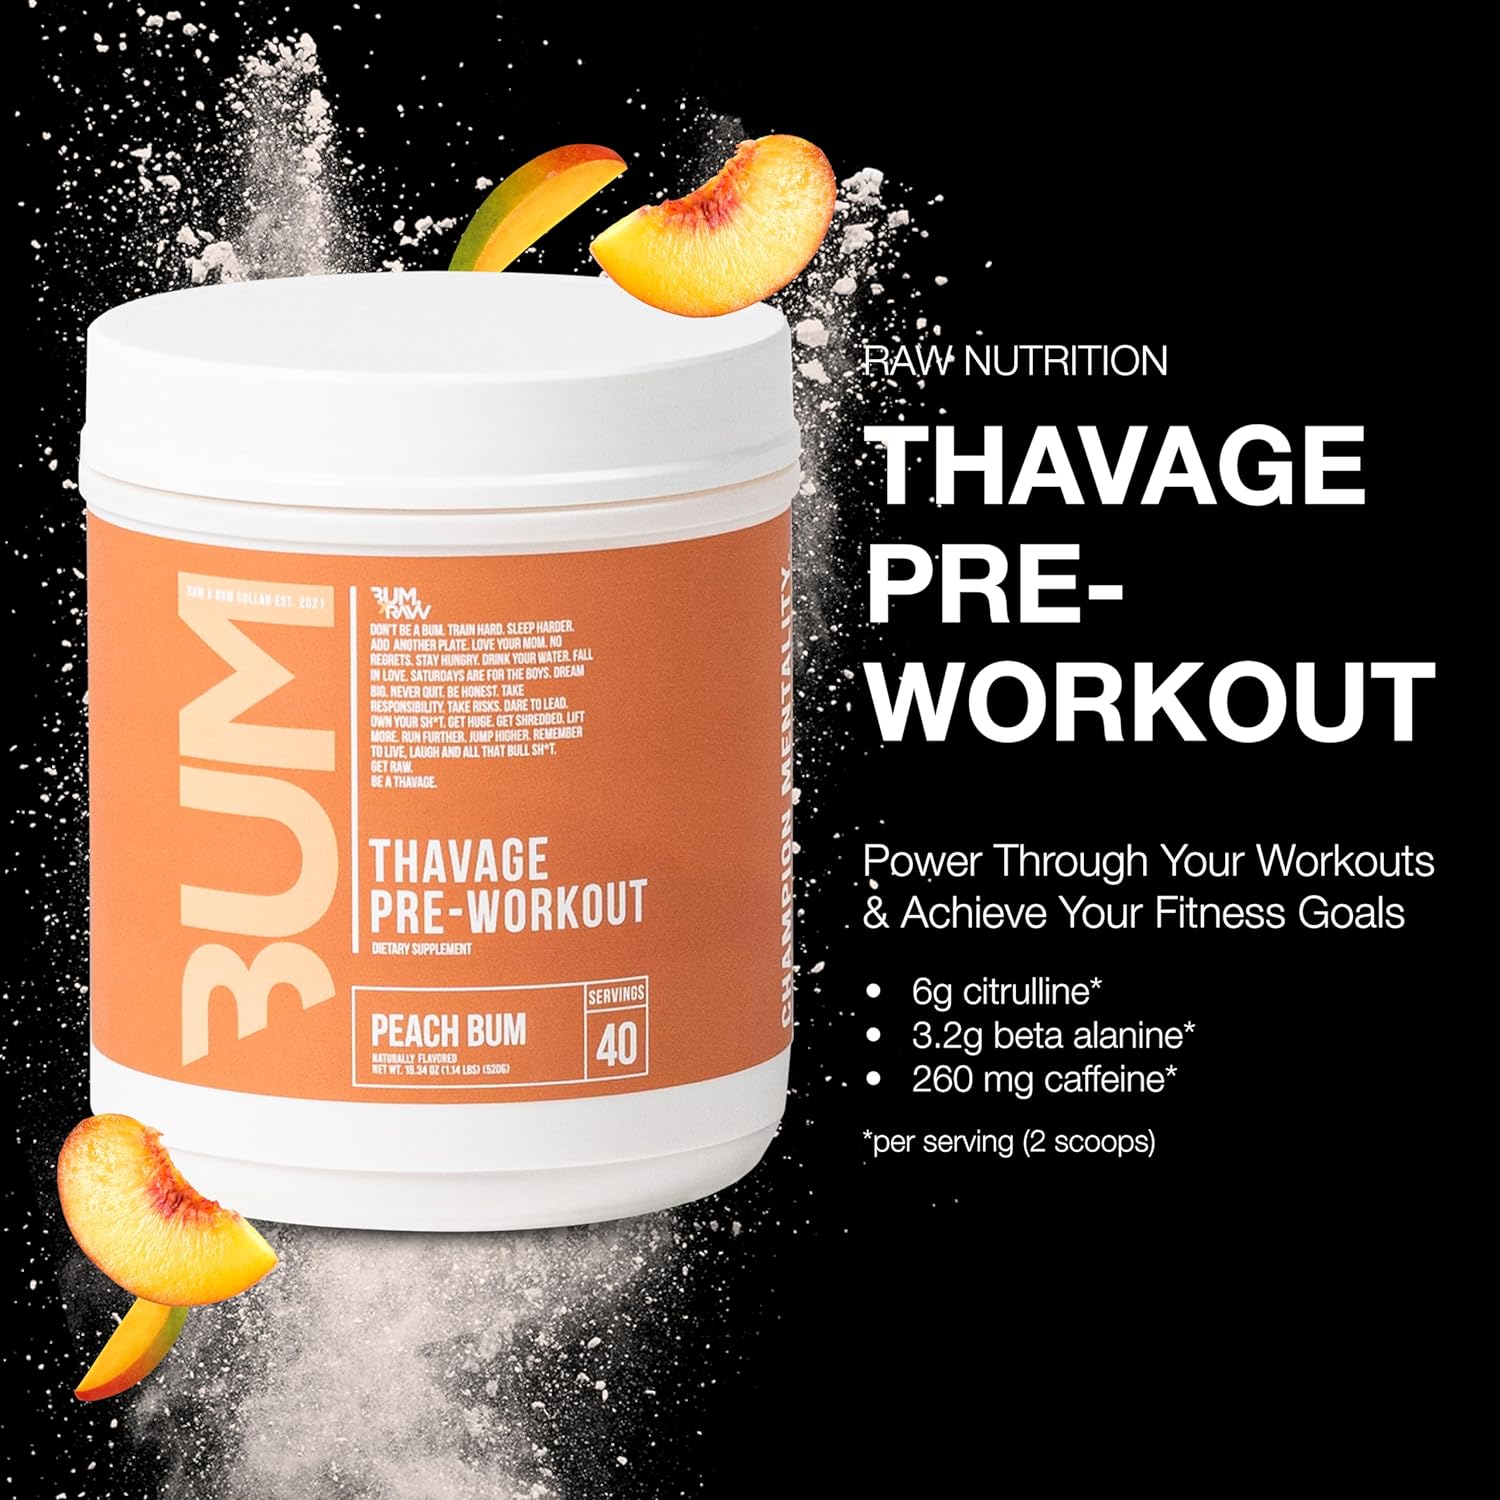 RAW Preworkout Powder, Thavage (Peach Bum) - Chris Bumstead Sports Nutrition Supplement for Men & Women - Cbum Pre Workout for Working Out, Hydration, Mental Focus & Energy - 40 Servings : Health & Household